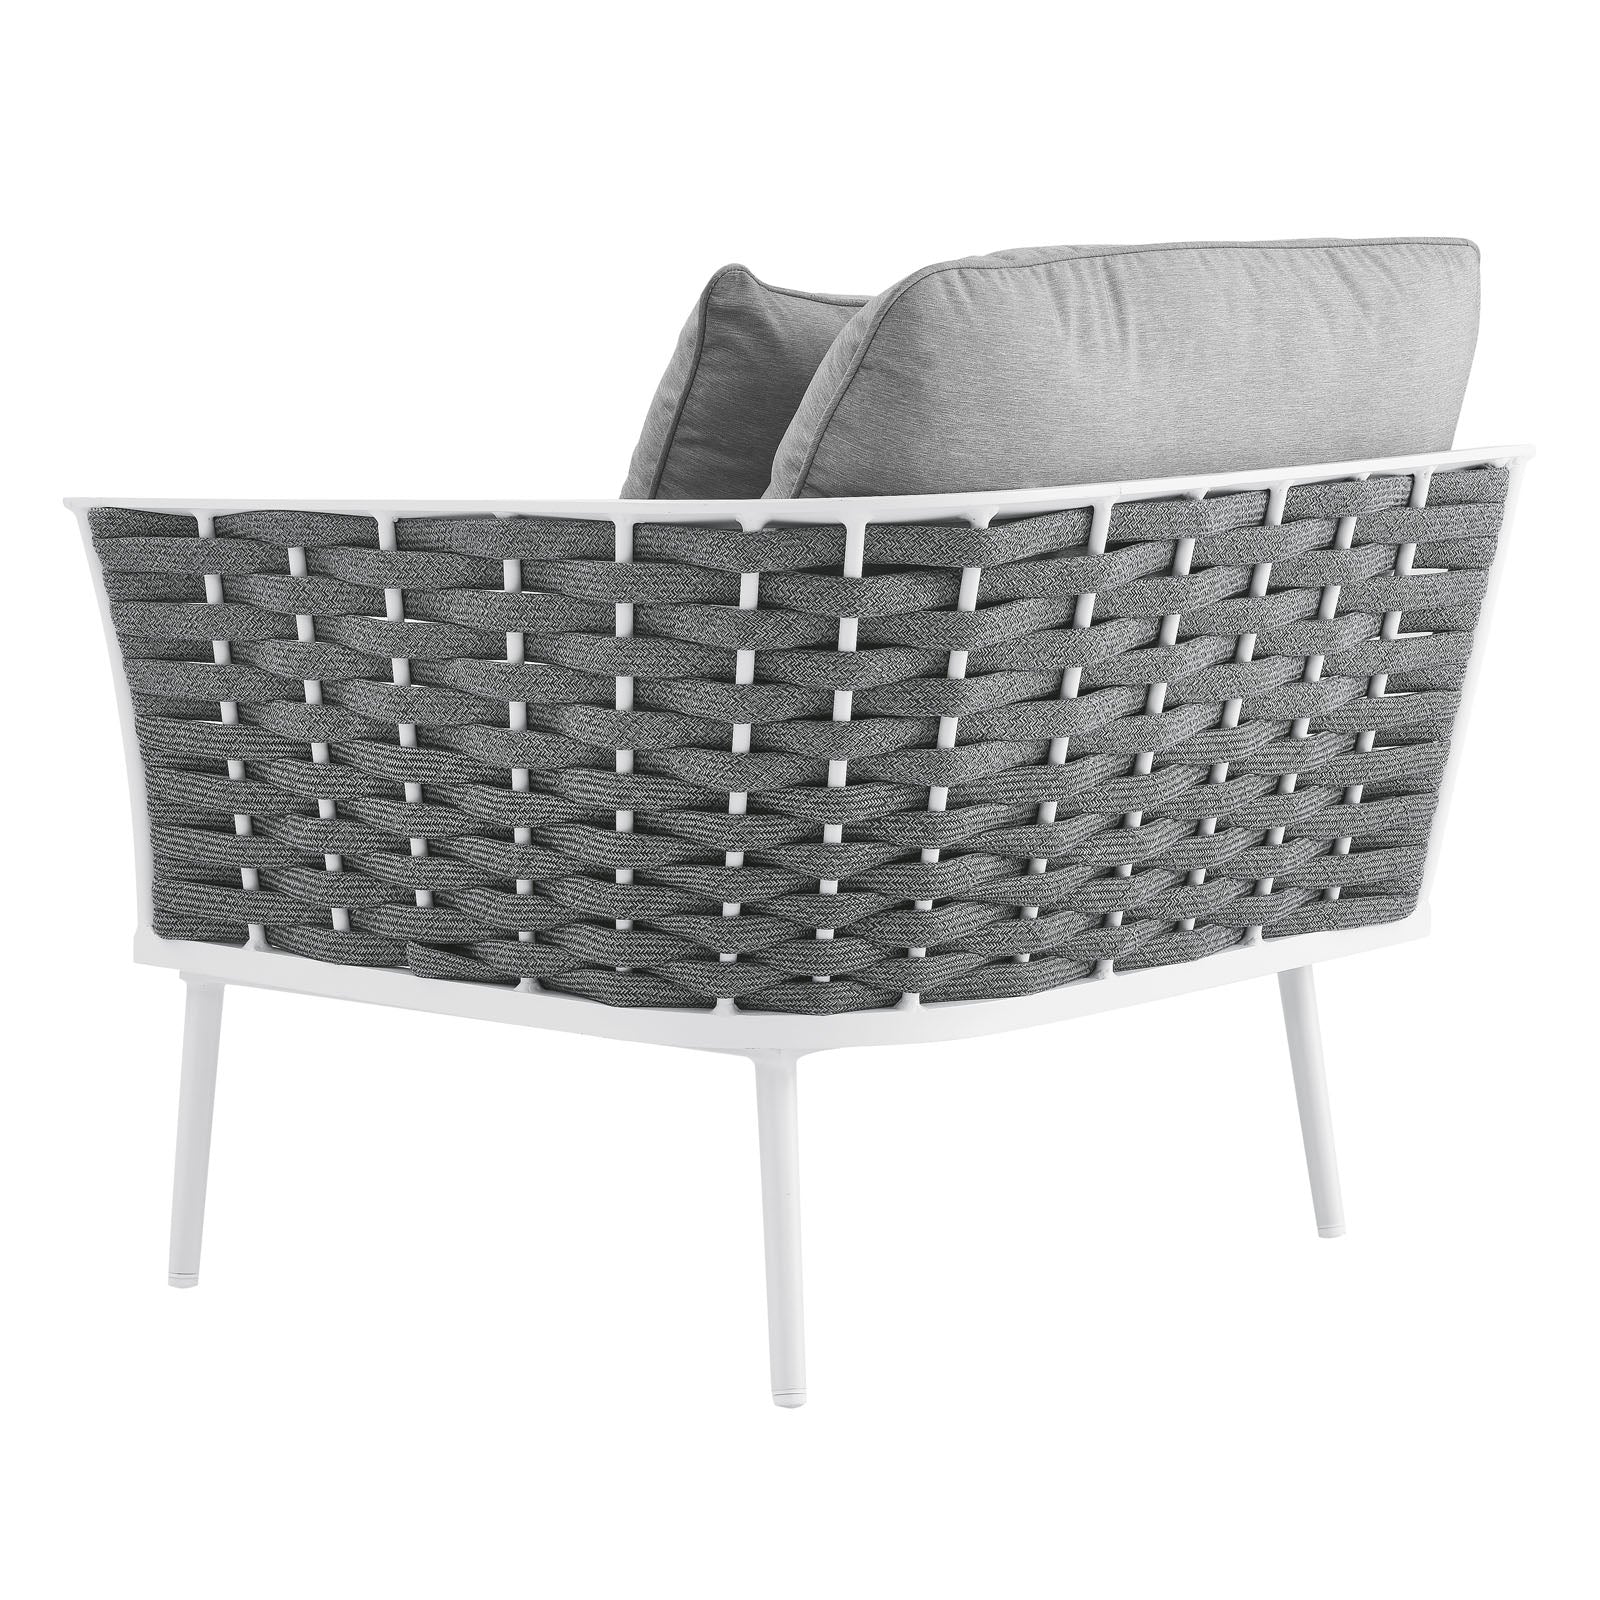 Stance Outdoor Patio Aluminum Right-Facing Armchair - East Shore Modern Home Furnishings